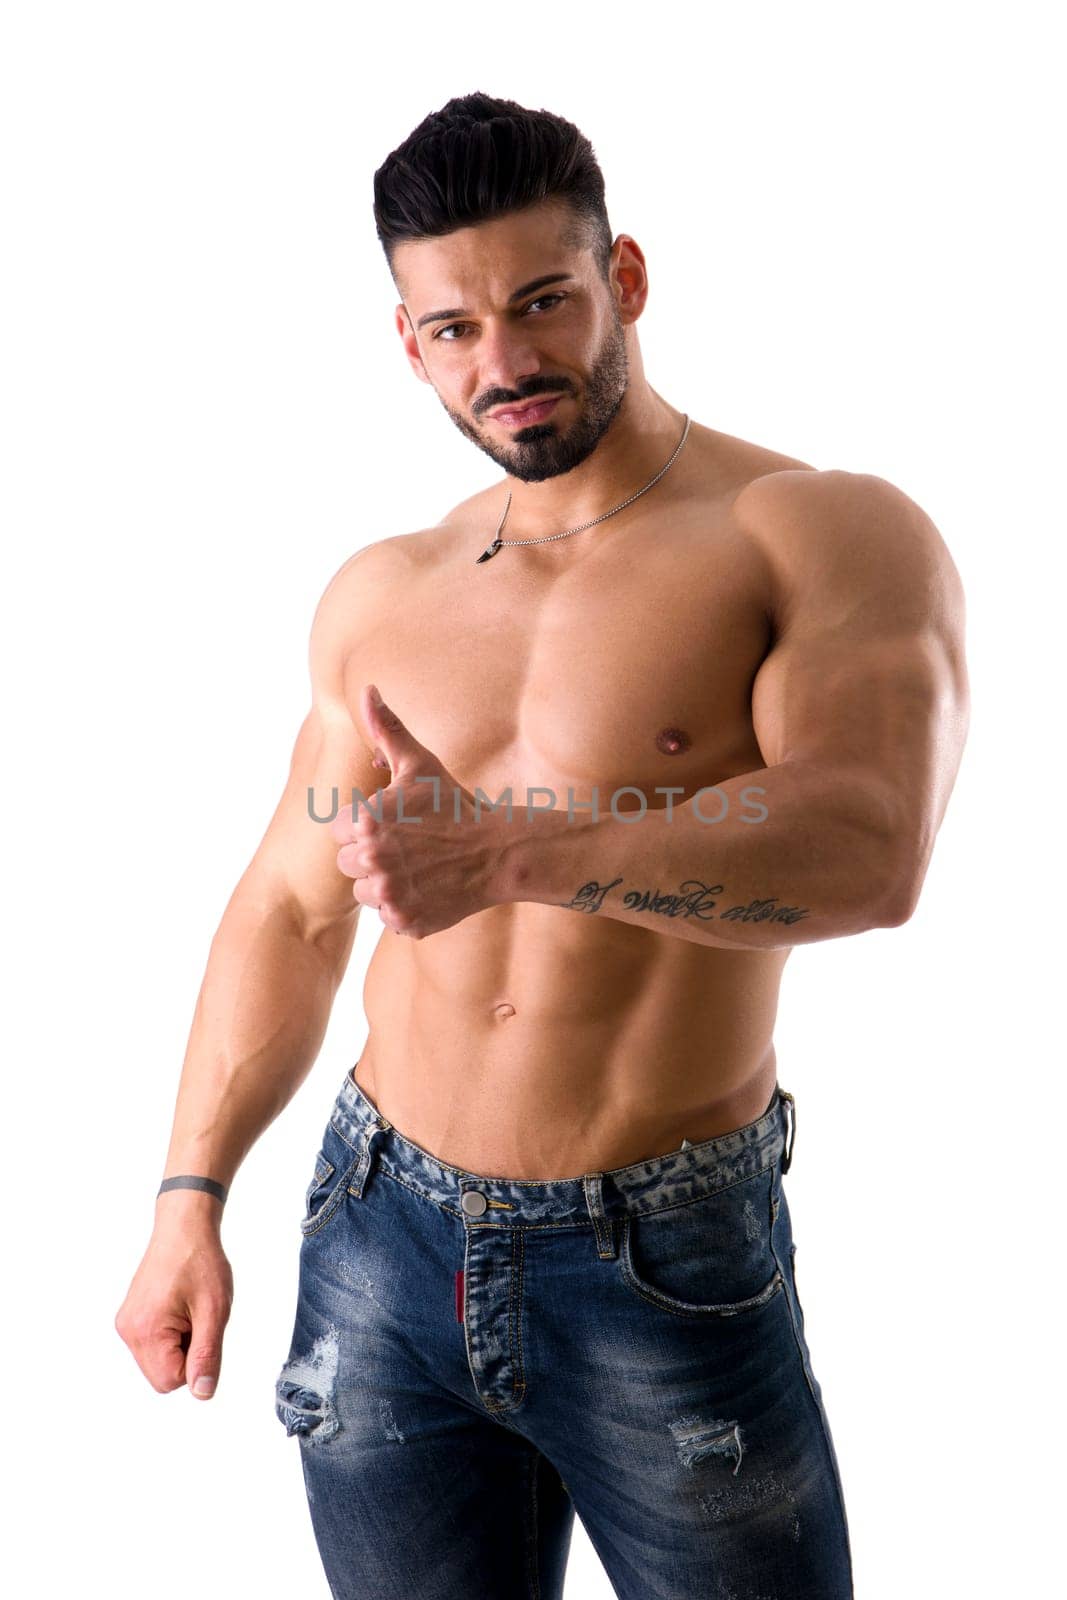 A shirtless man posing for the camera doing thumb up gesture for OK or approval